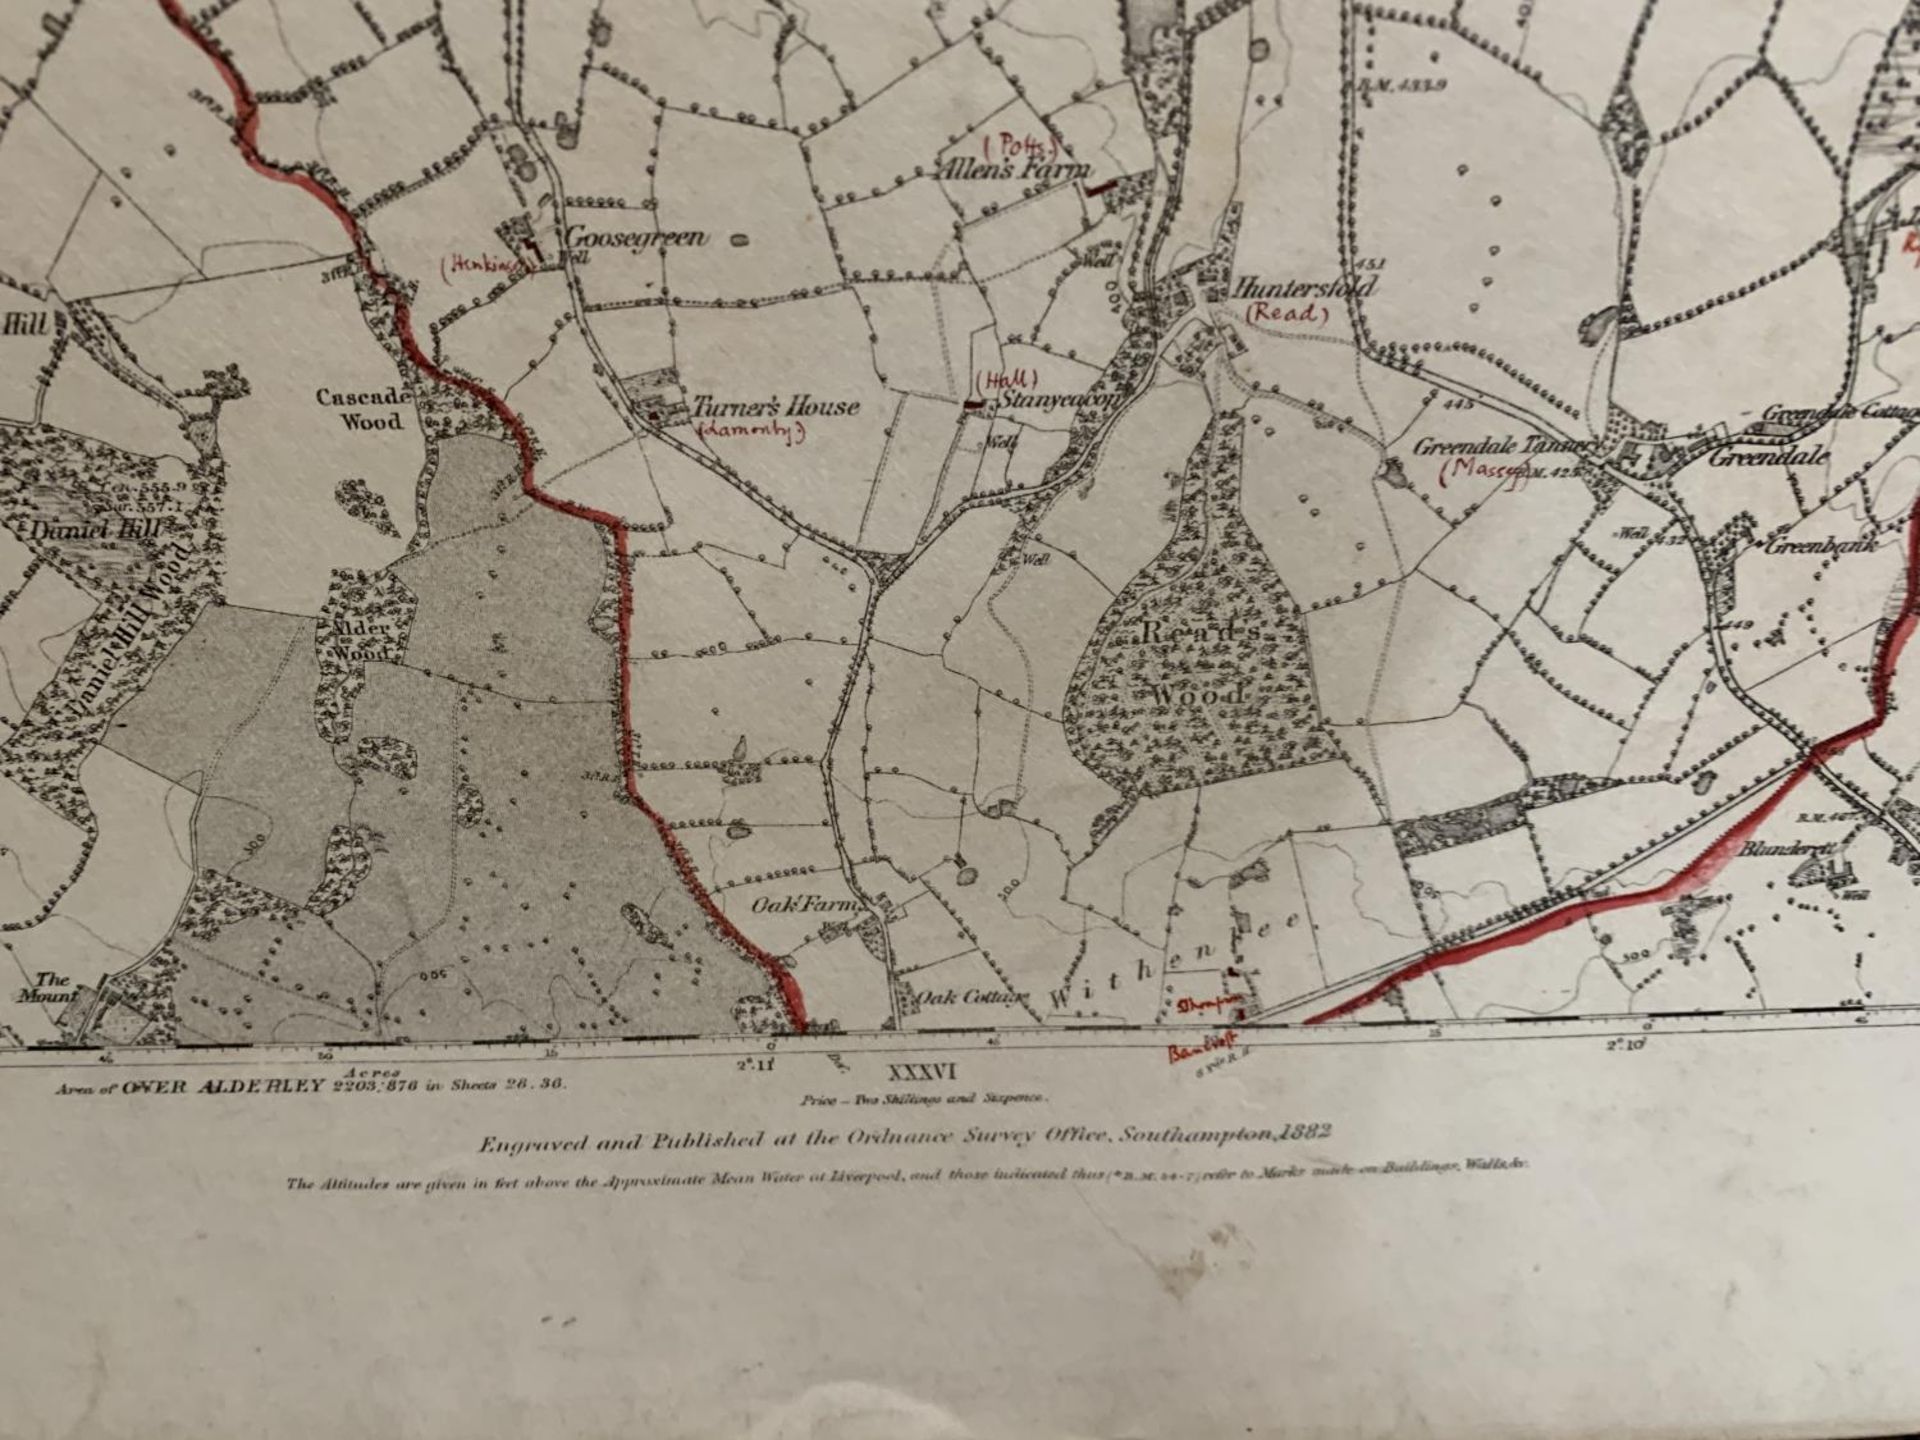 AN ANTIQUARIAN ORDNANCE SURVEY MAP OF STOCKPORT (DISLEY) CHESHIRE, A REVISION OF 1907 WITH ADDITIONS - Image 5 of 10